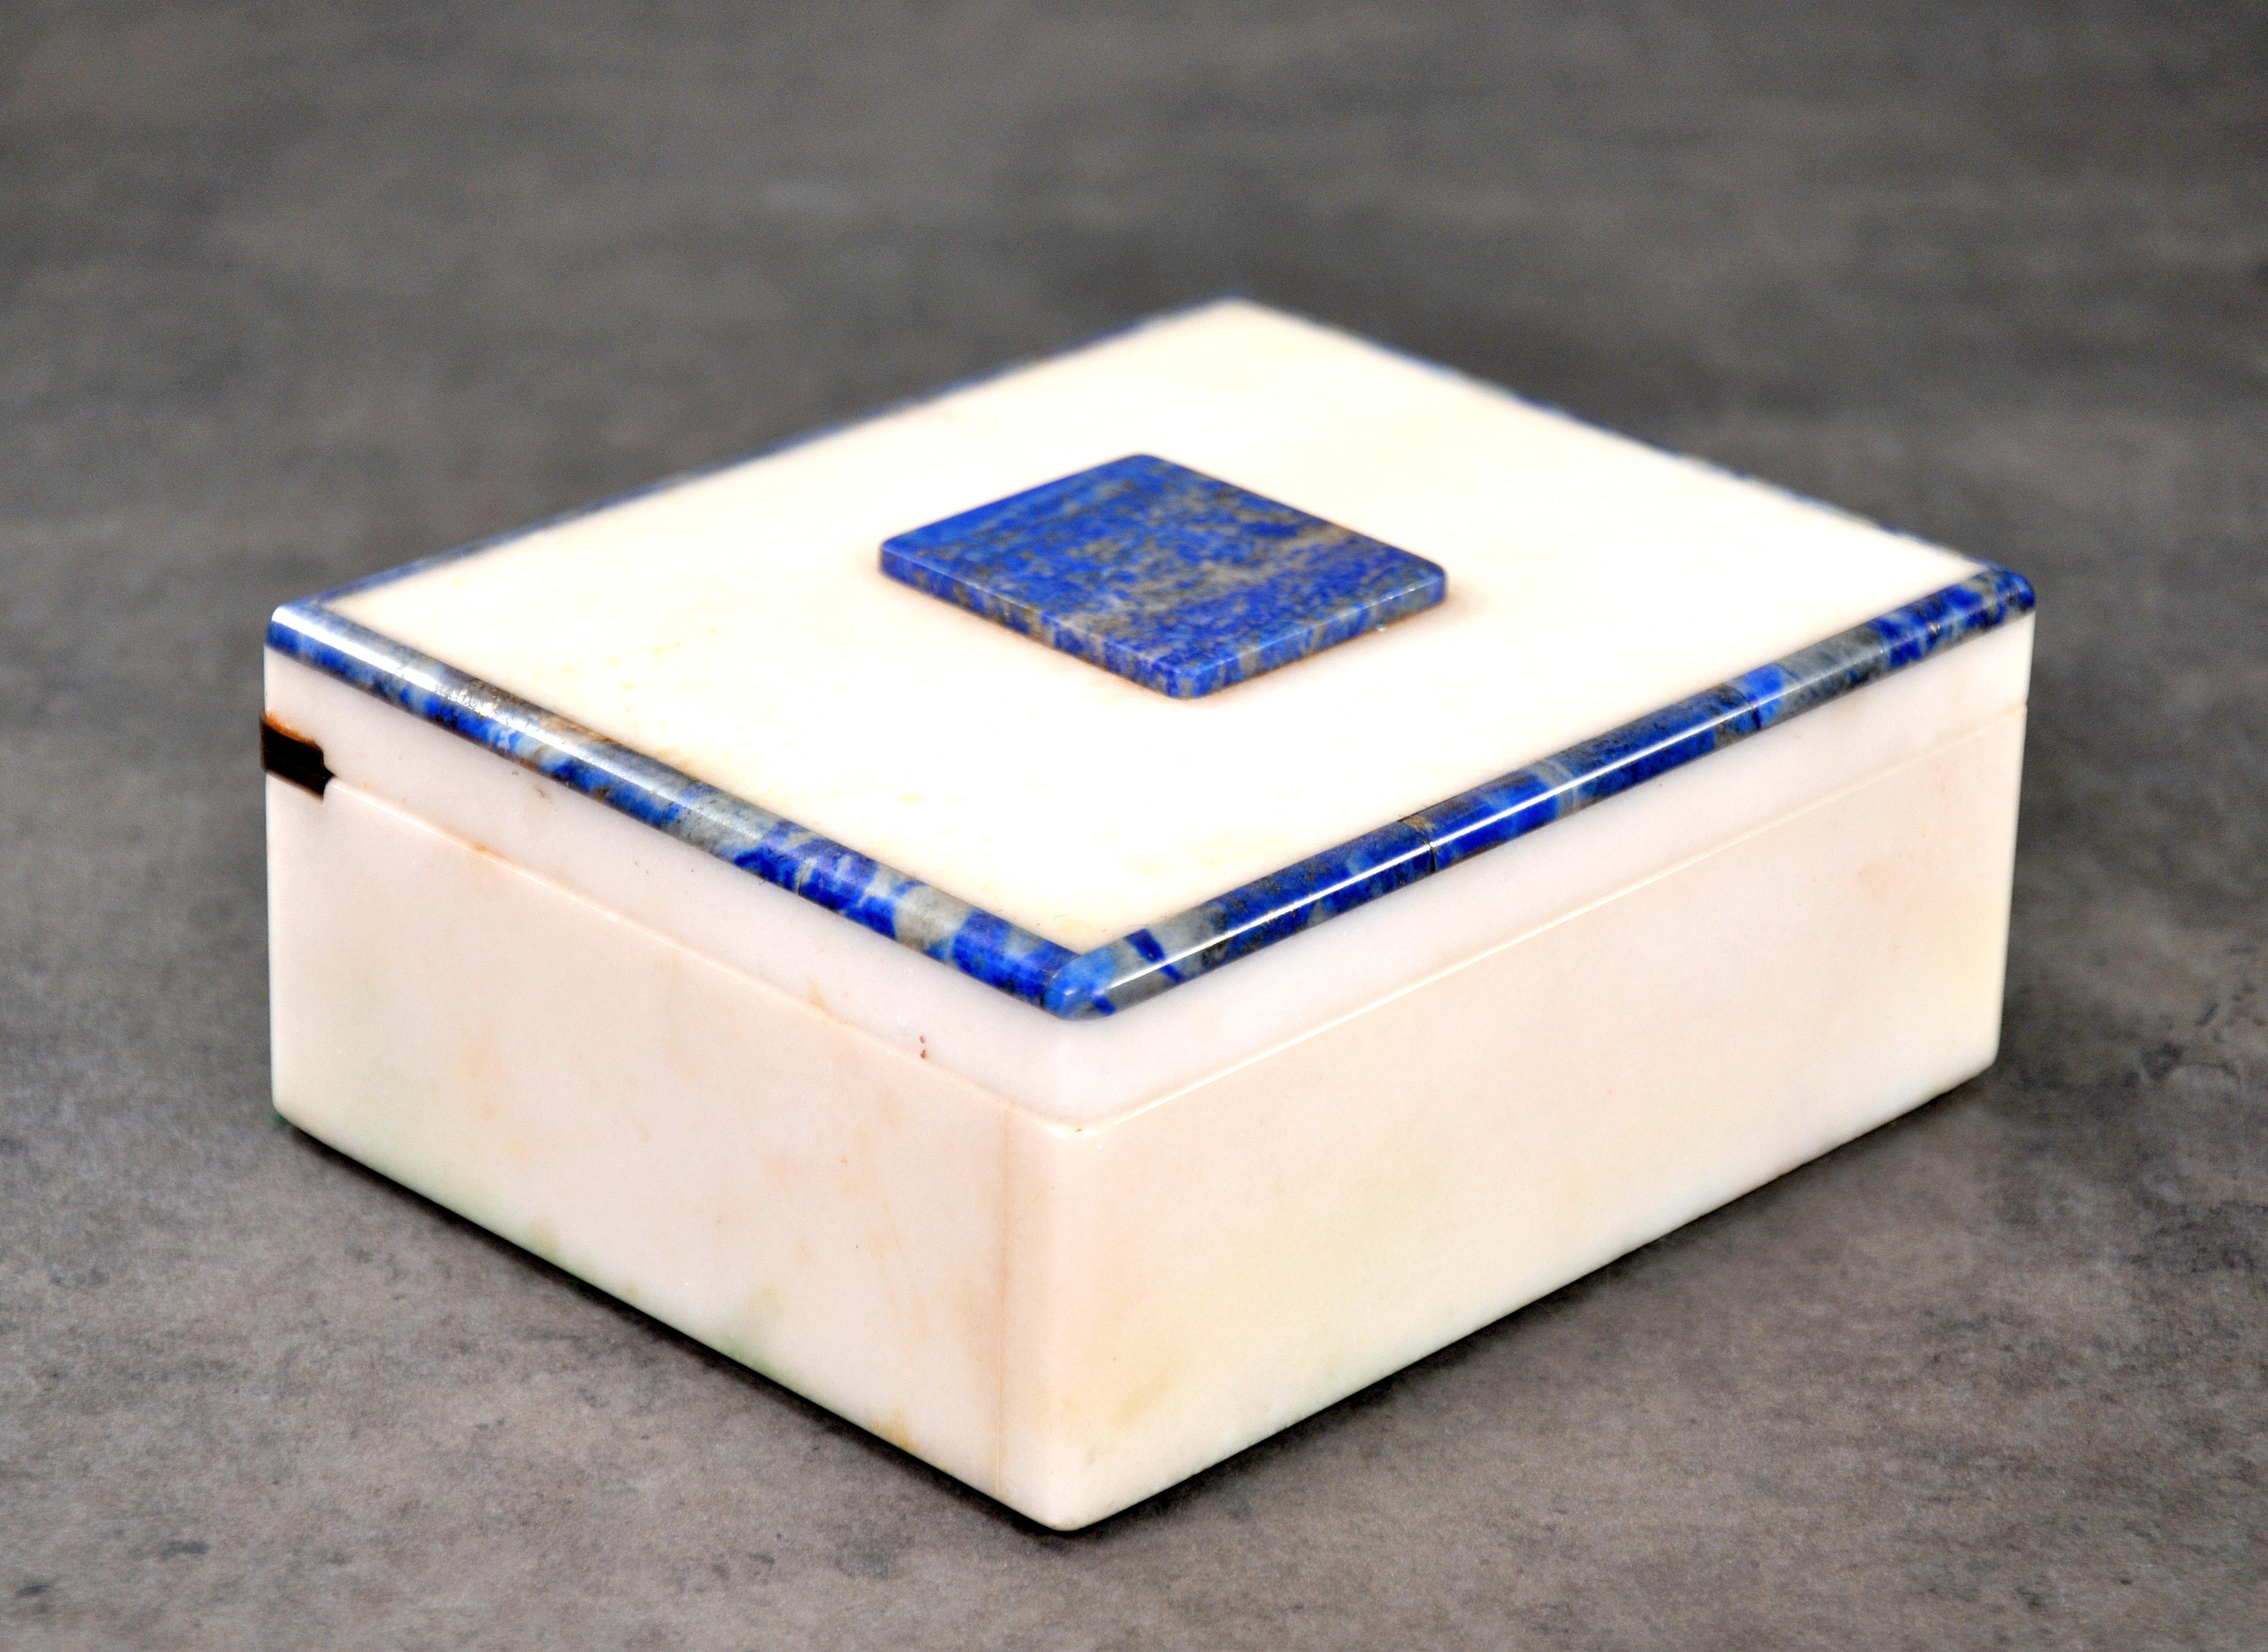 An Art Deco rectangular white onyx and lapis lazuli trinket, jewelry or vanity box with brass piano hinged lid.